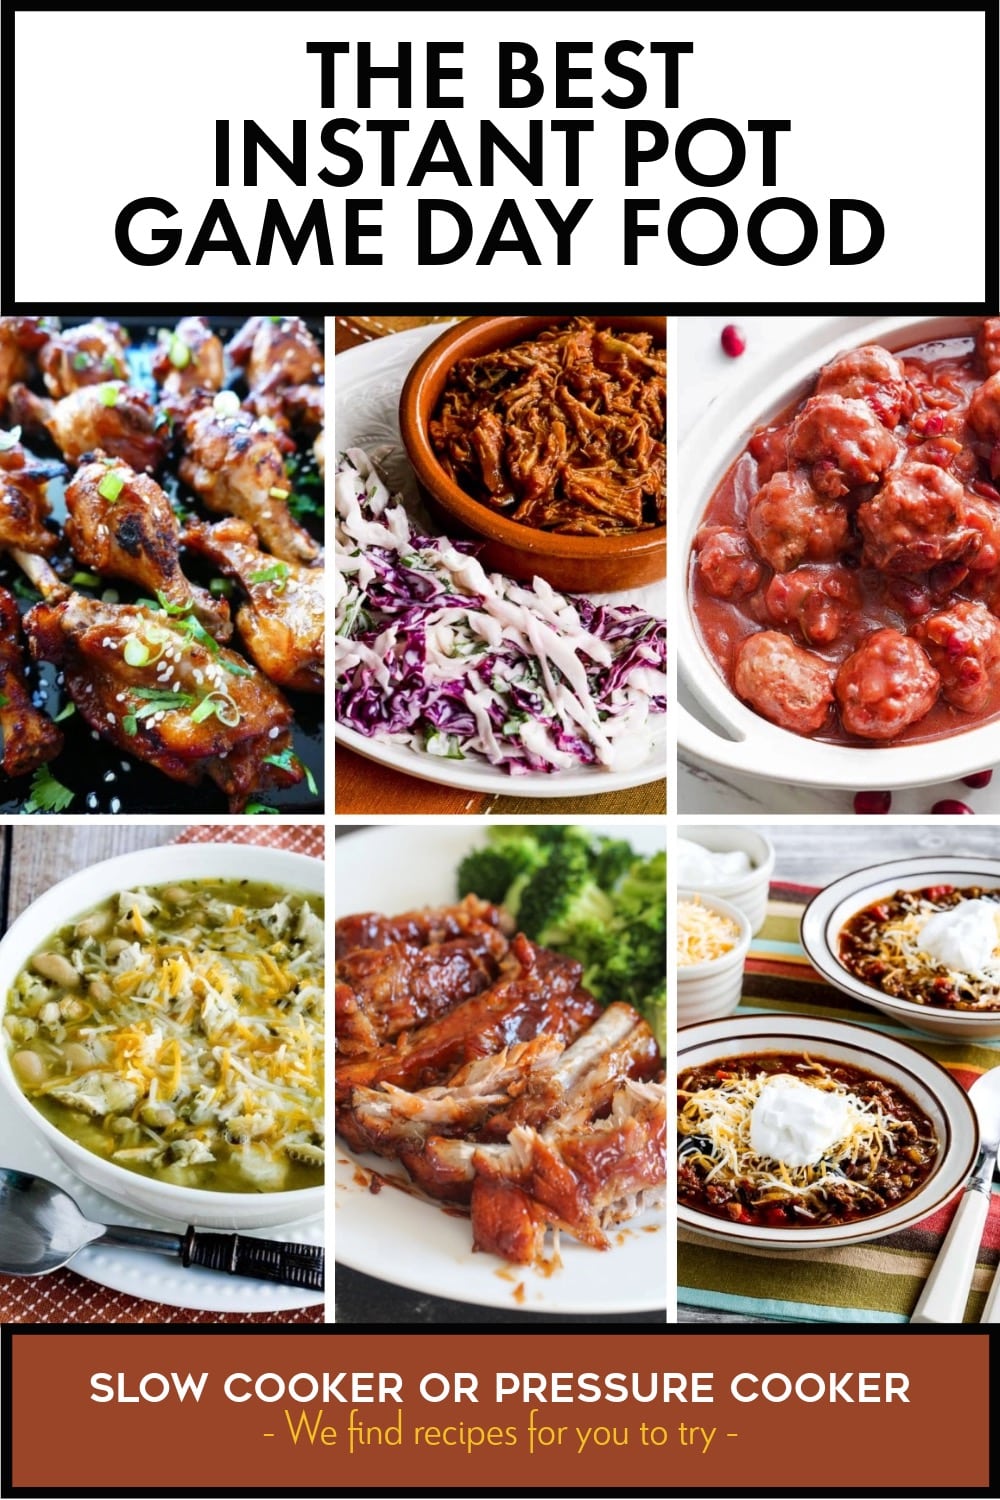 Pinterest image of The BEST Instant Pot Game Day Food